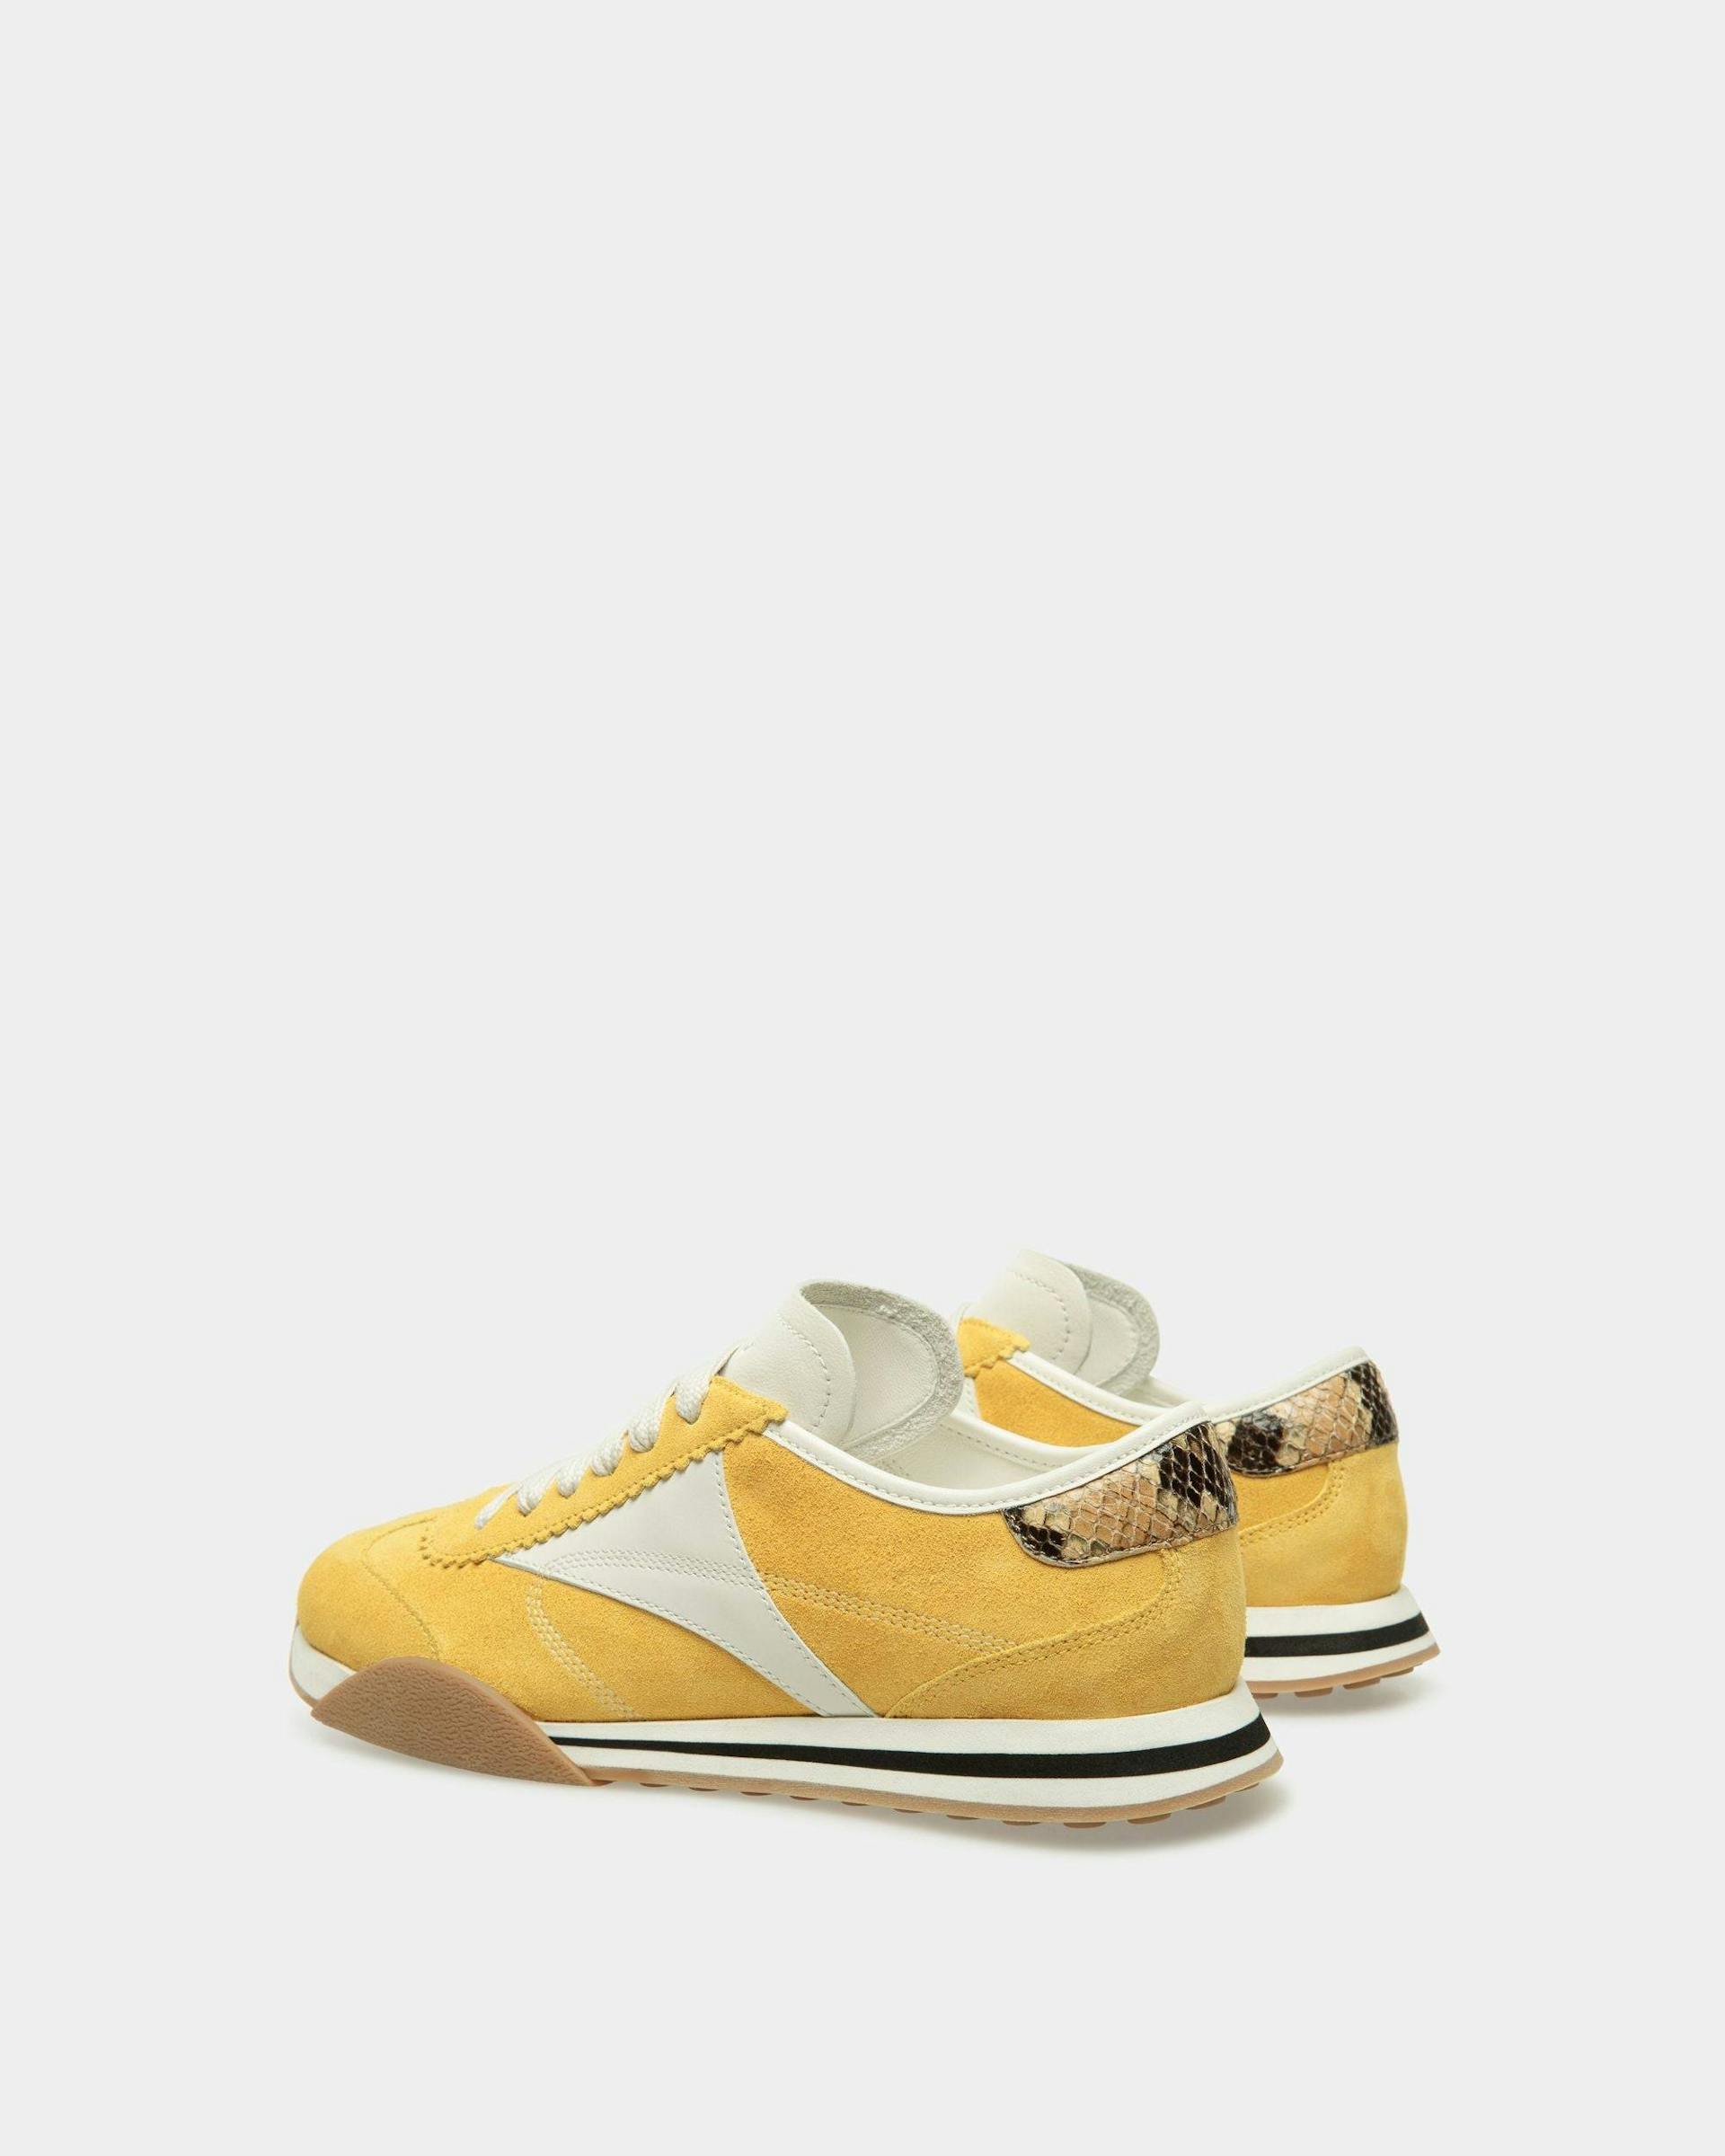 Sussex Sneakers In Yellow And White Leather - Women's - Bally - 03